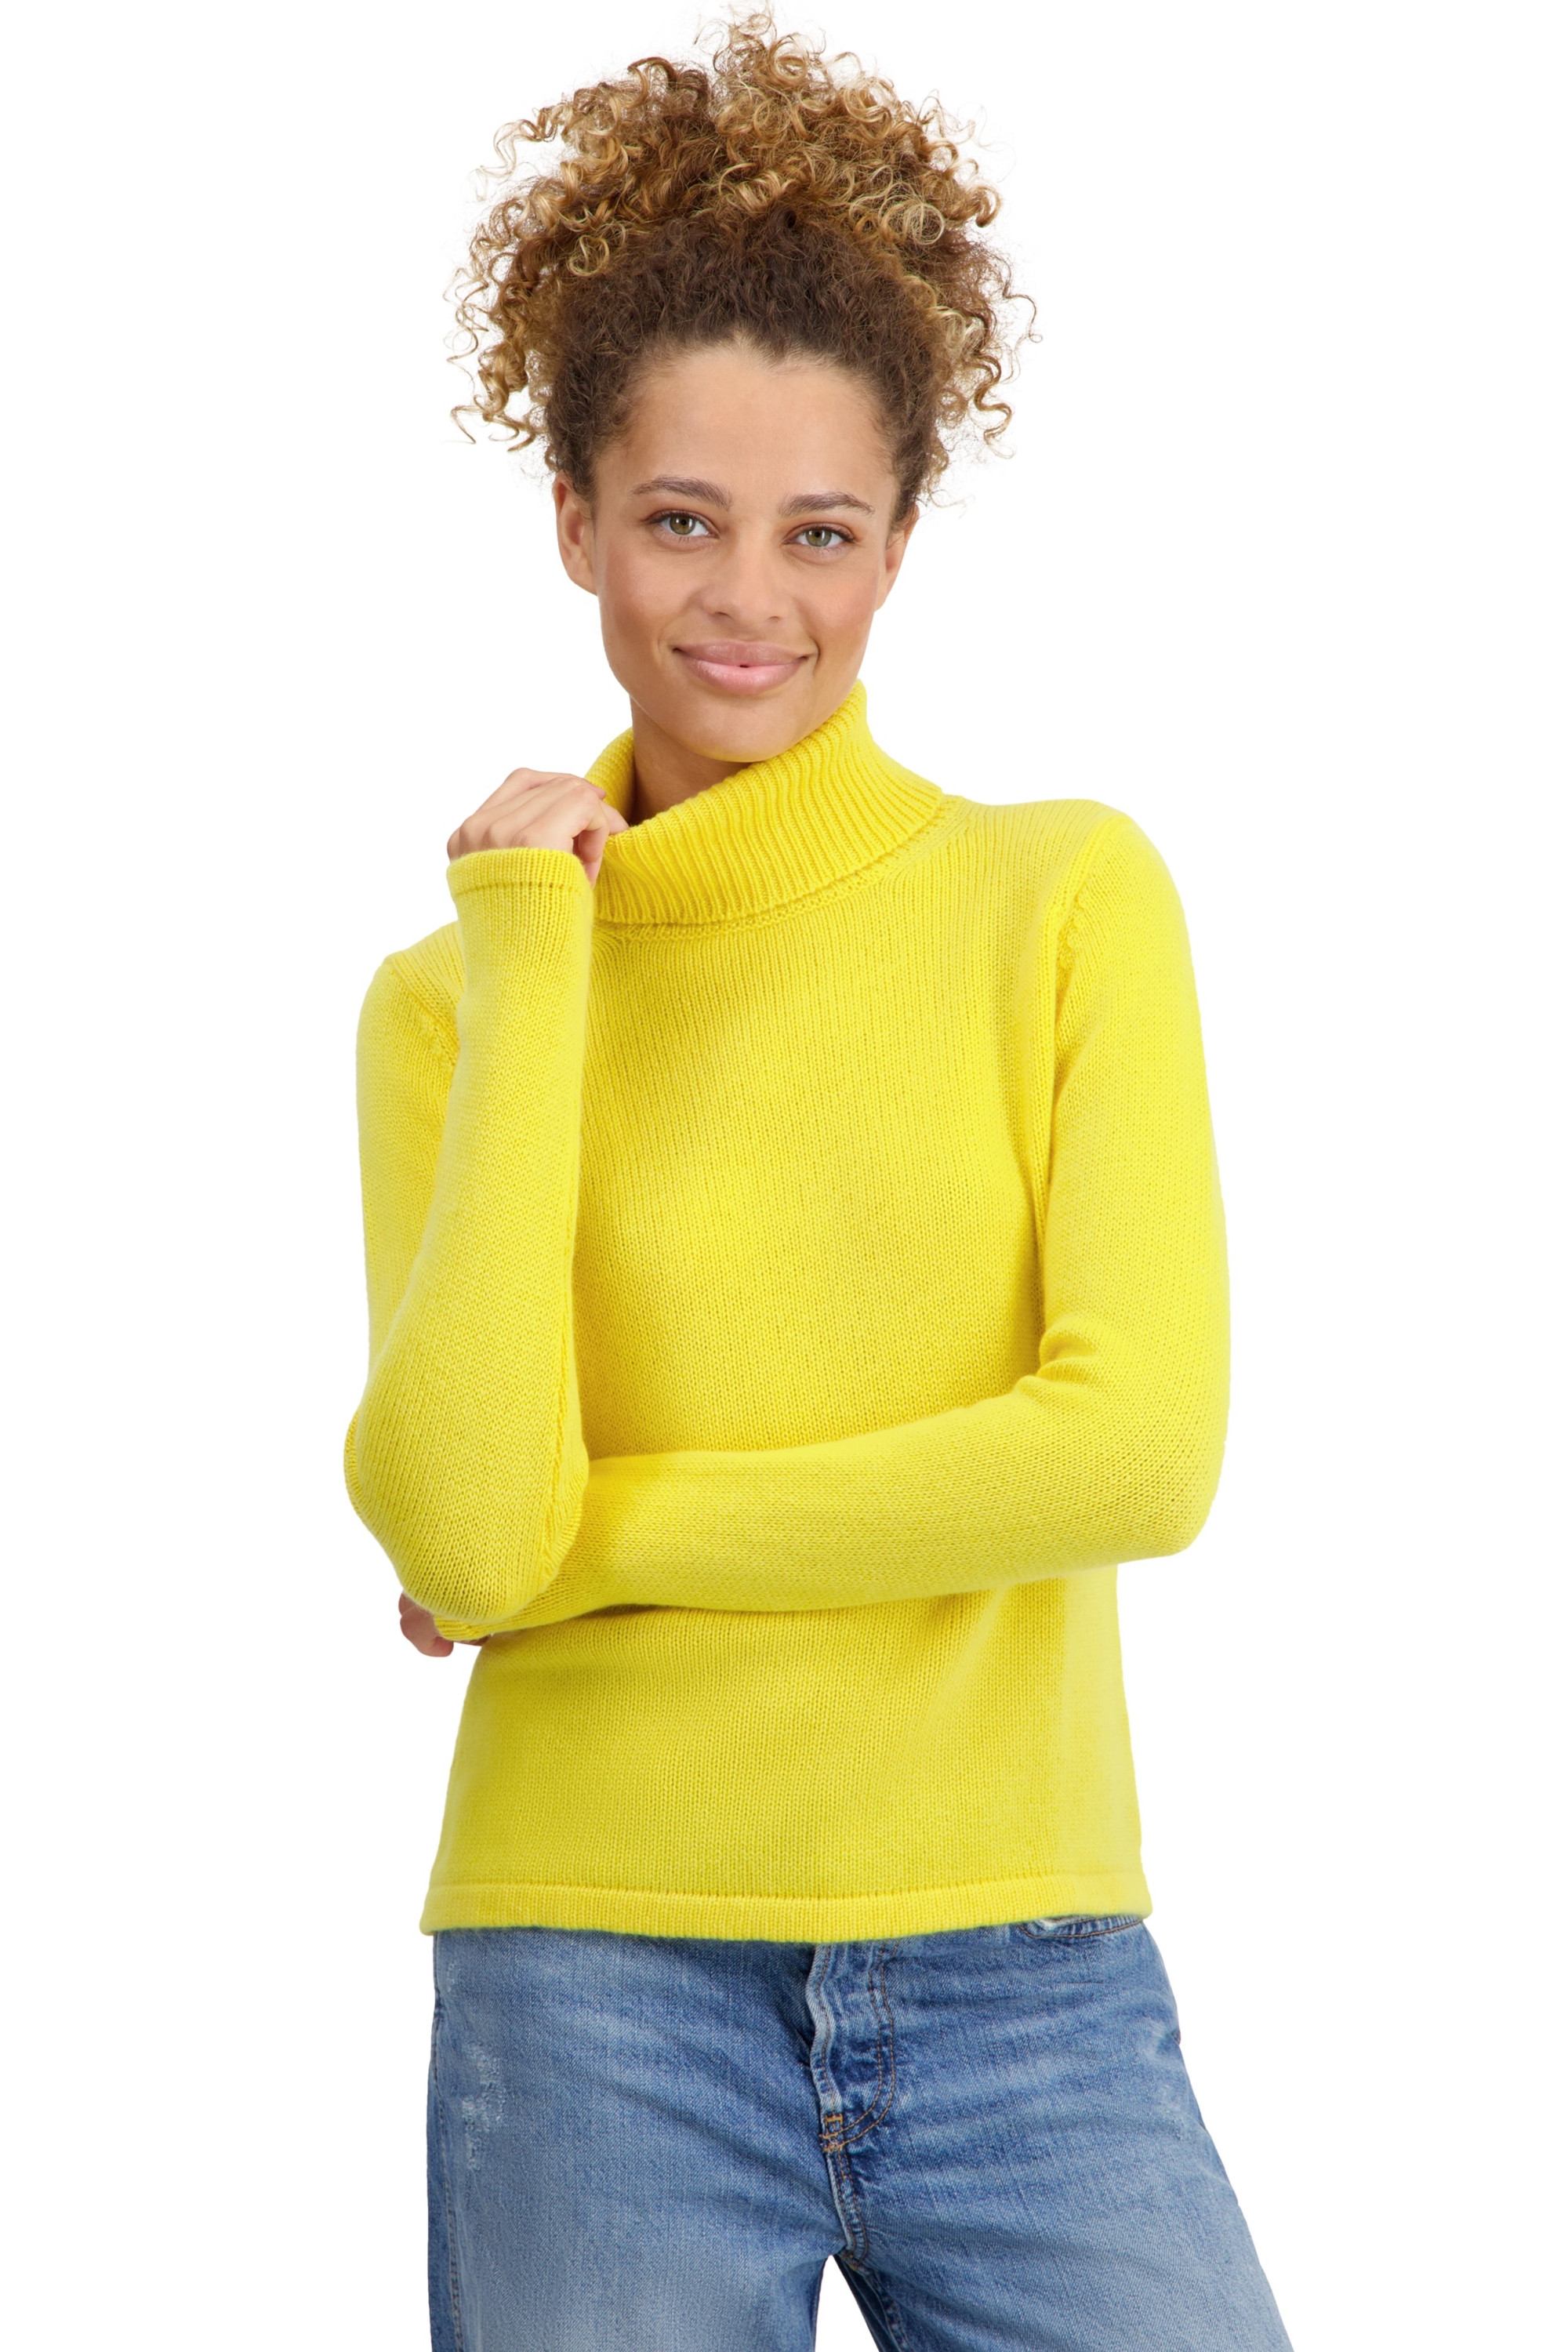 Cashmere ladies basic sweaters at low prices taipei first daffodil xs